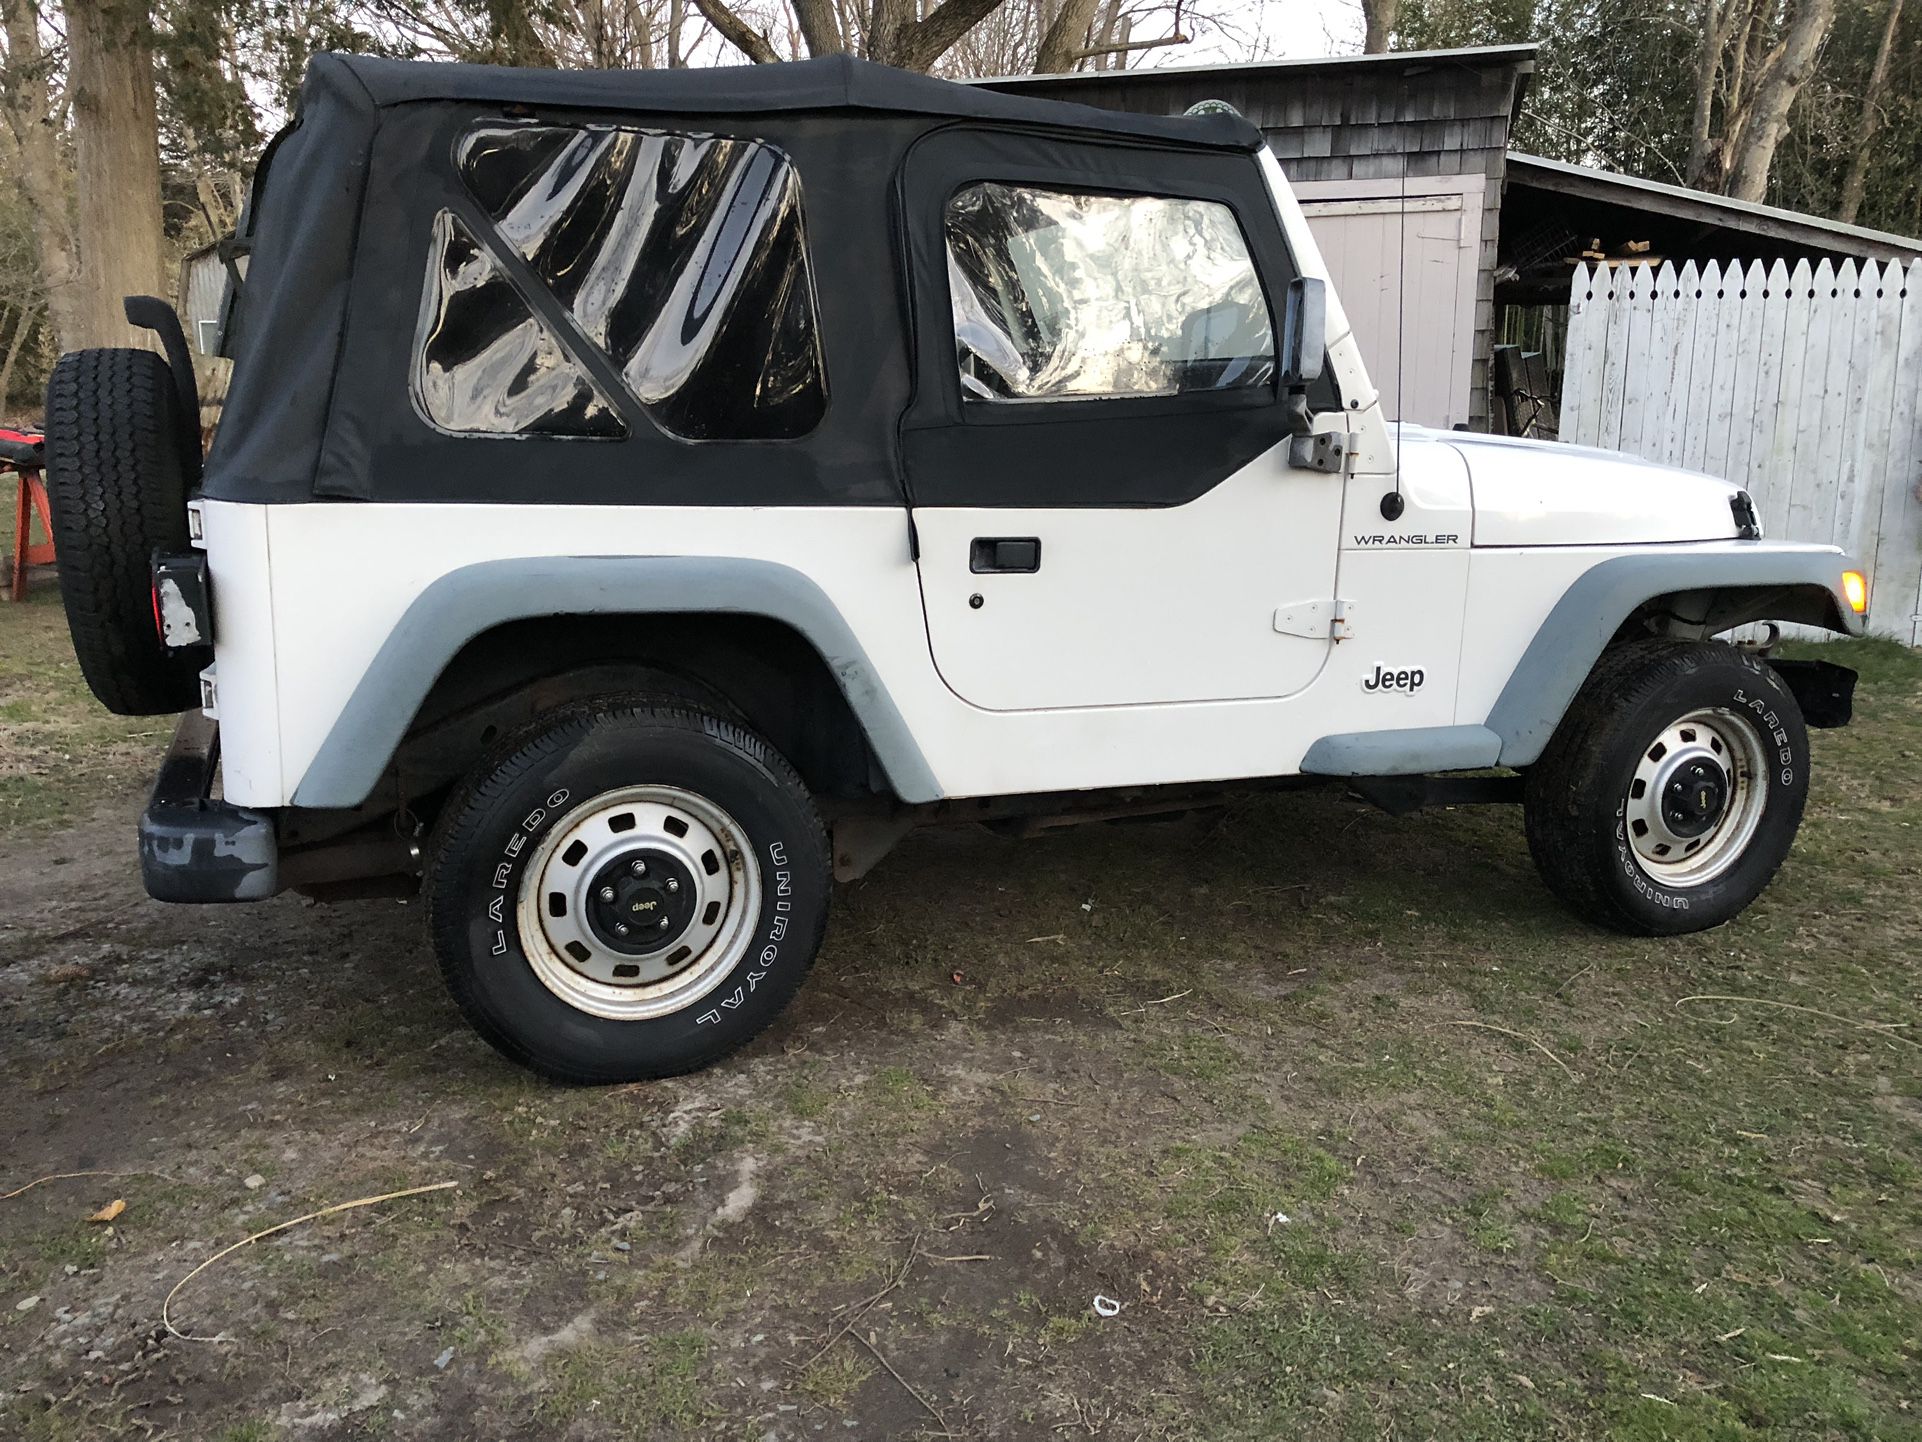 2000 Jeep Wrangler for Sale in Eastport, NY - OfferUp